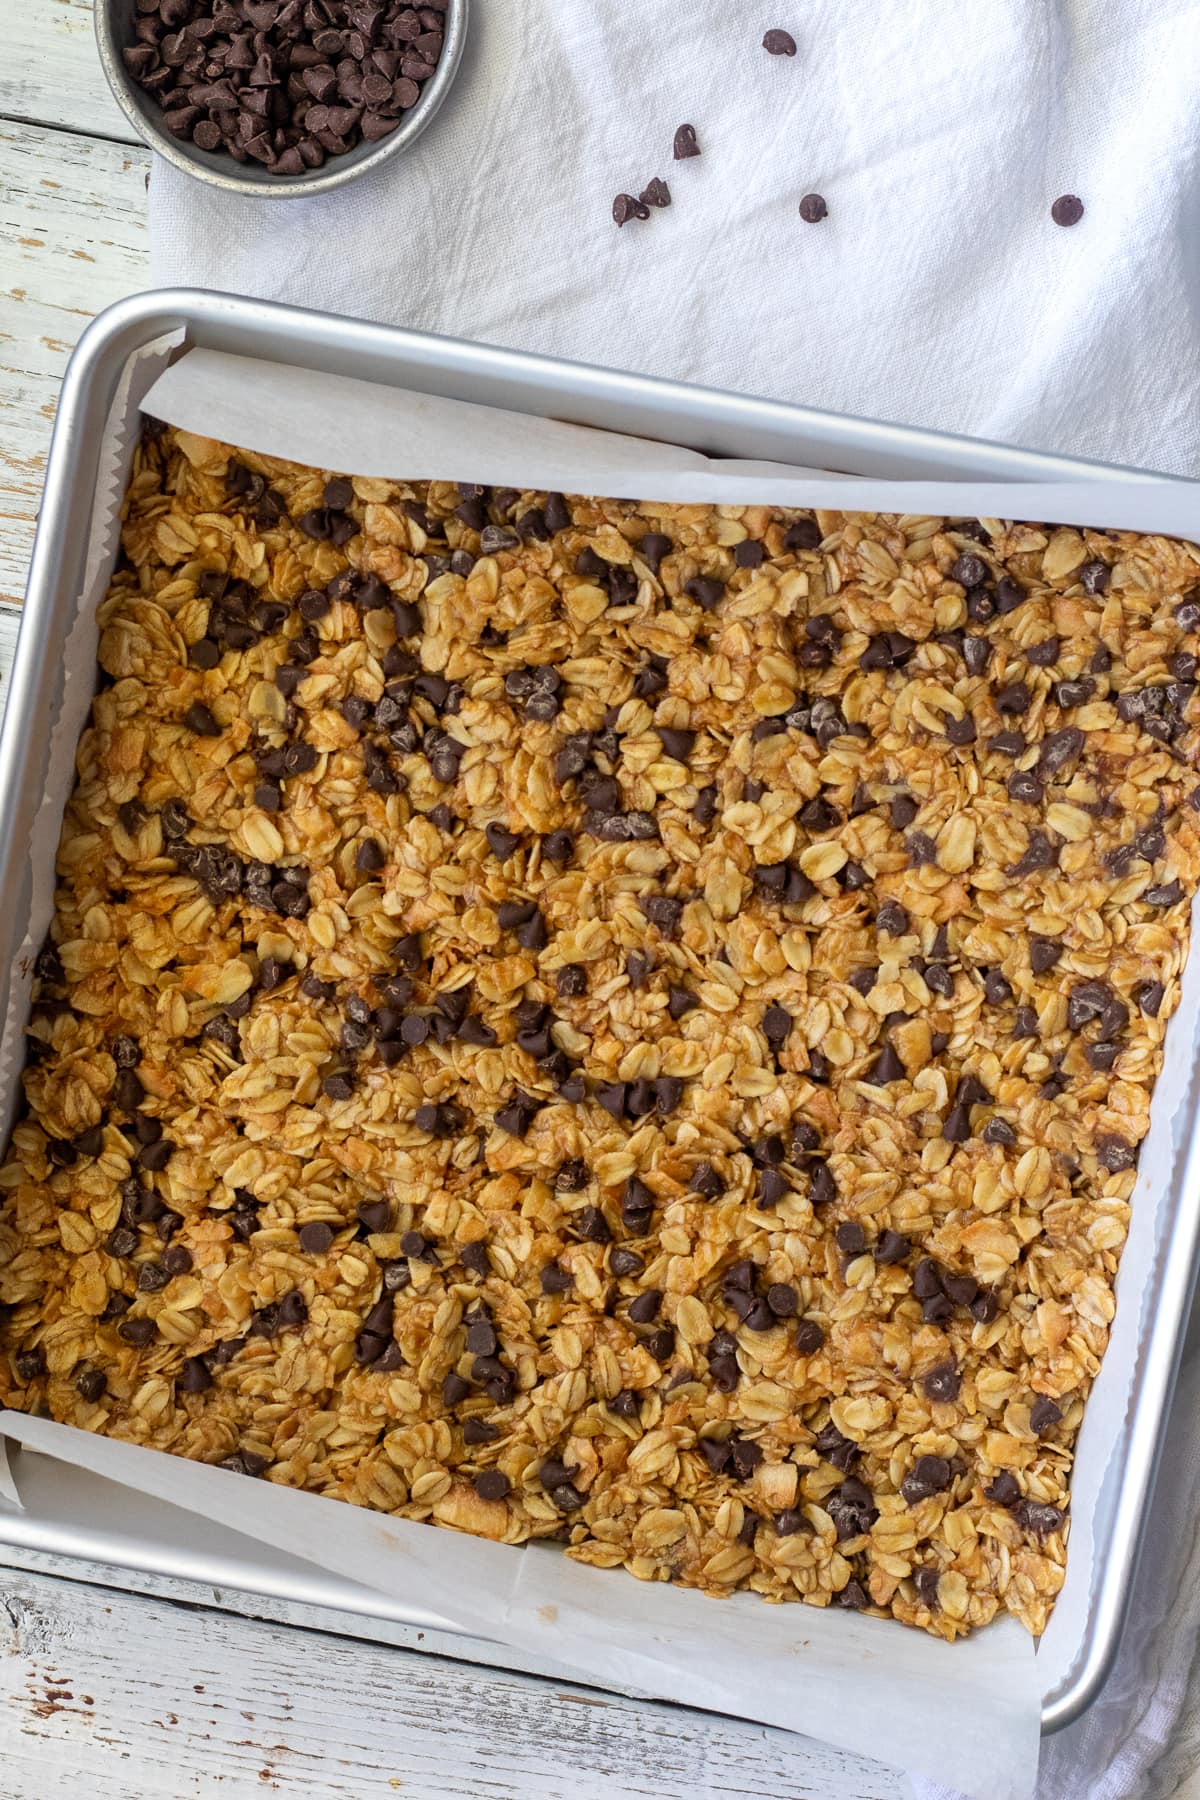 How to make your own chewy granola bars